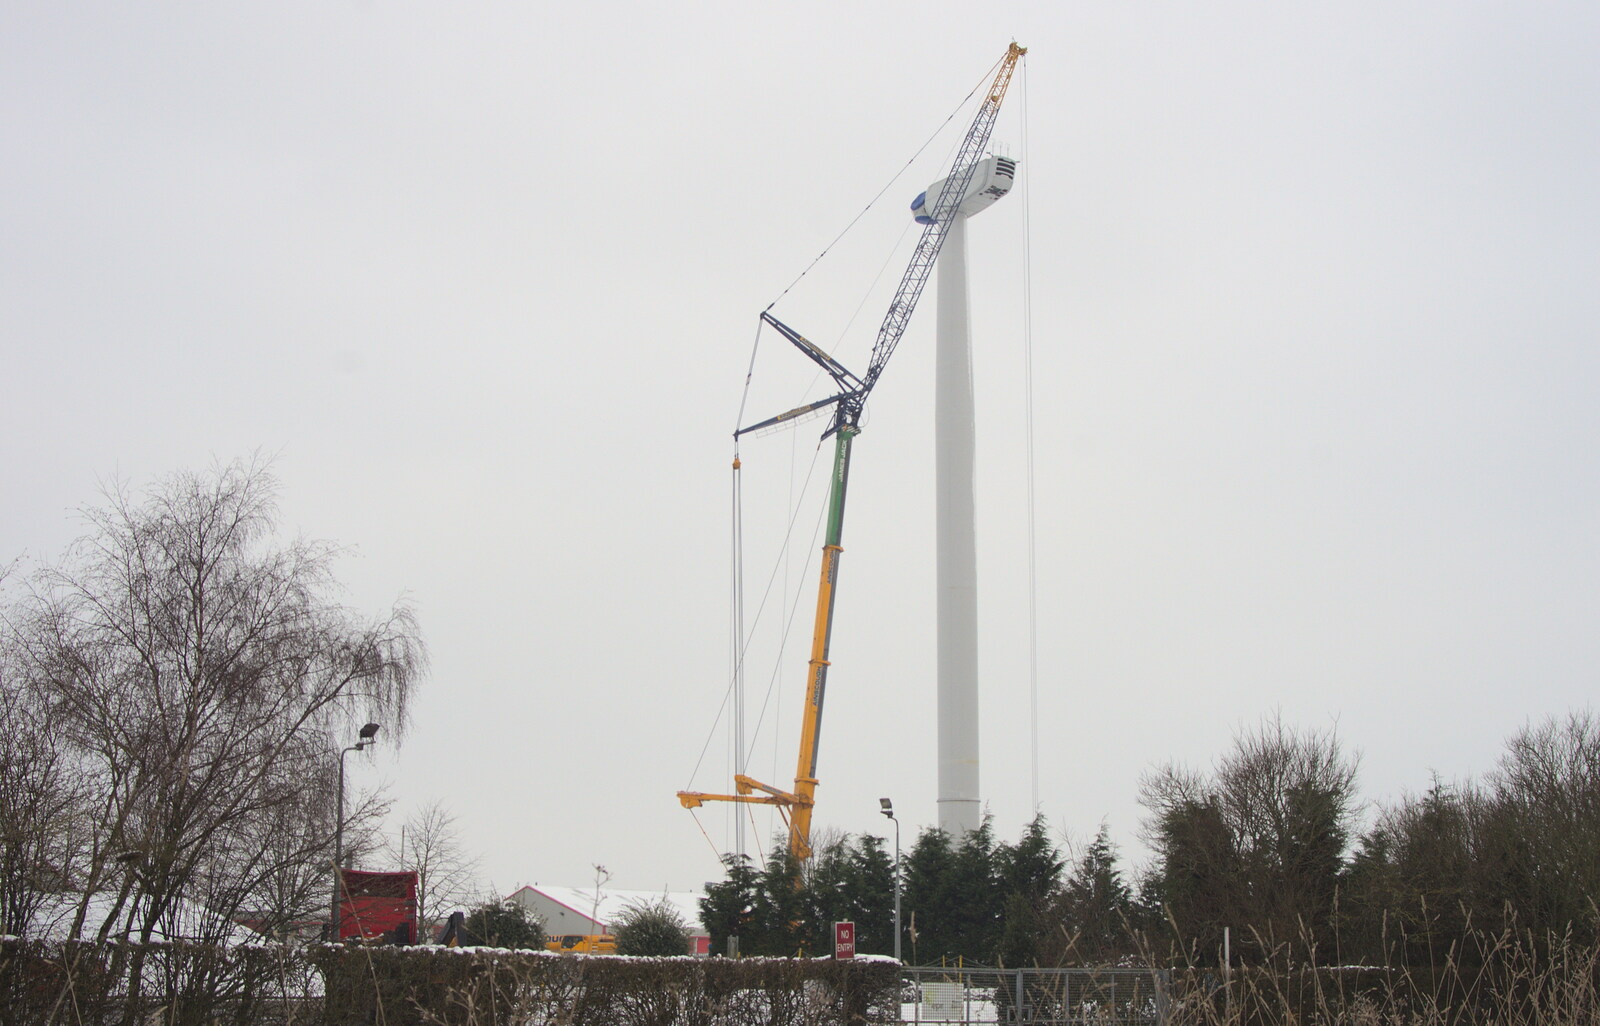 More Snow Days and a Wind Turbine is Built, Brome, Suffolk - 19th January 2013: A close-up of the turbine construction